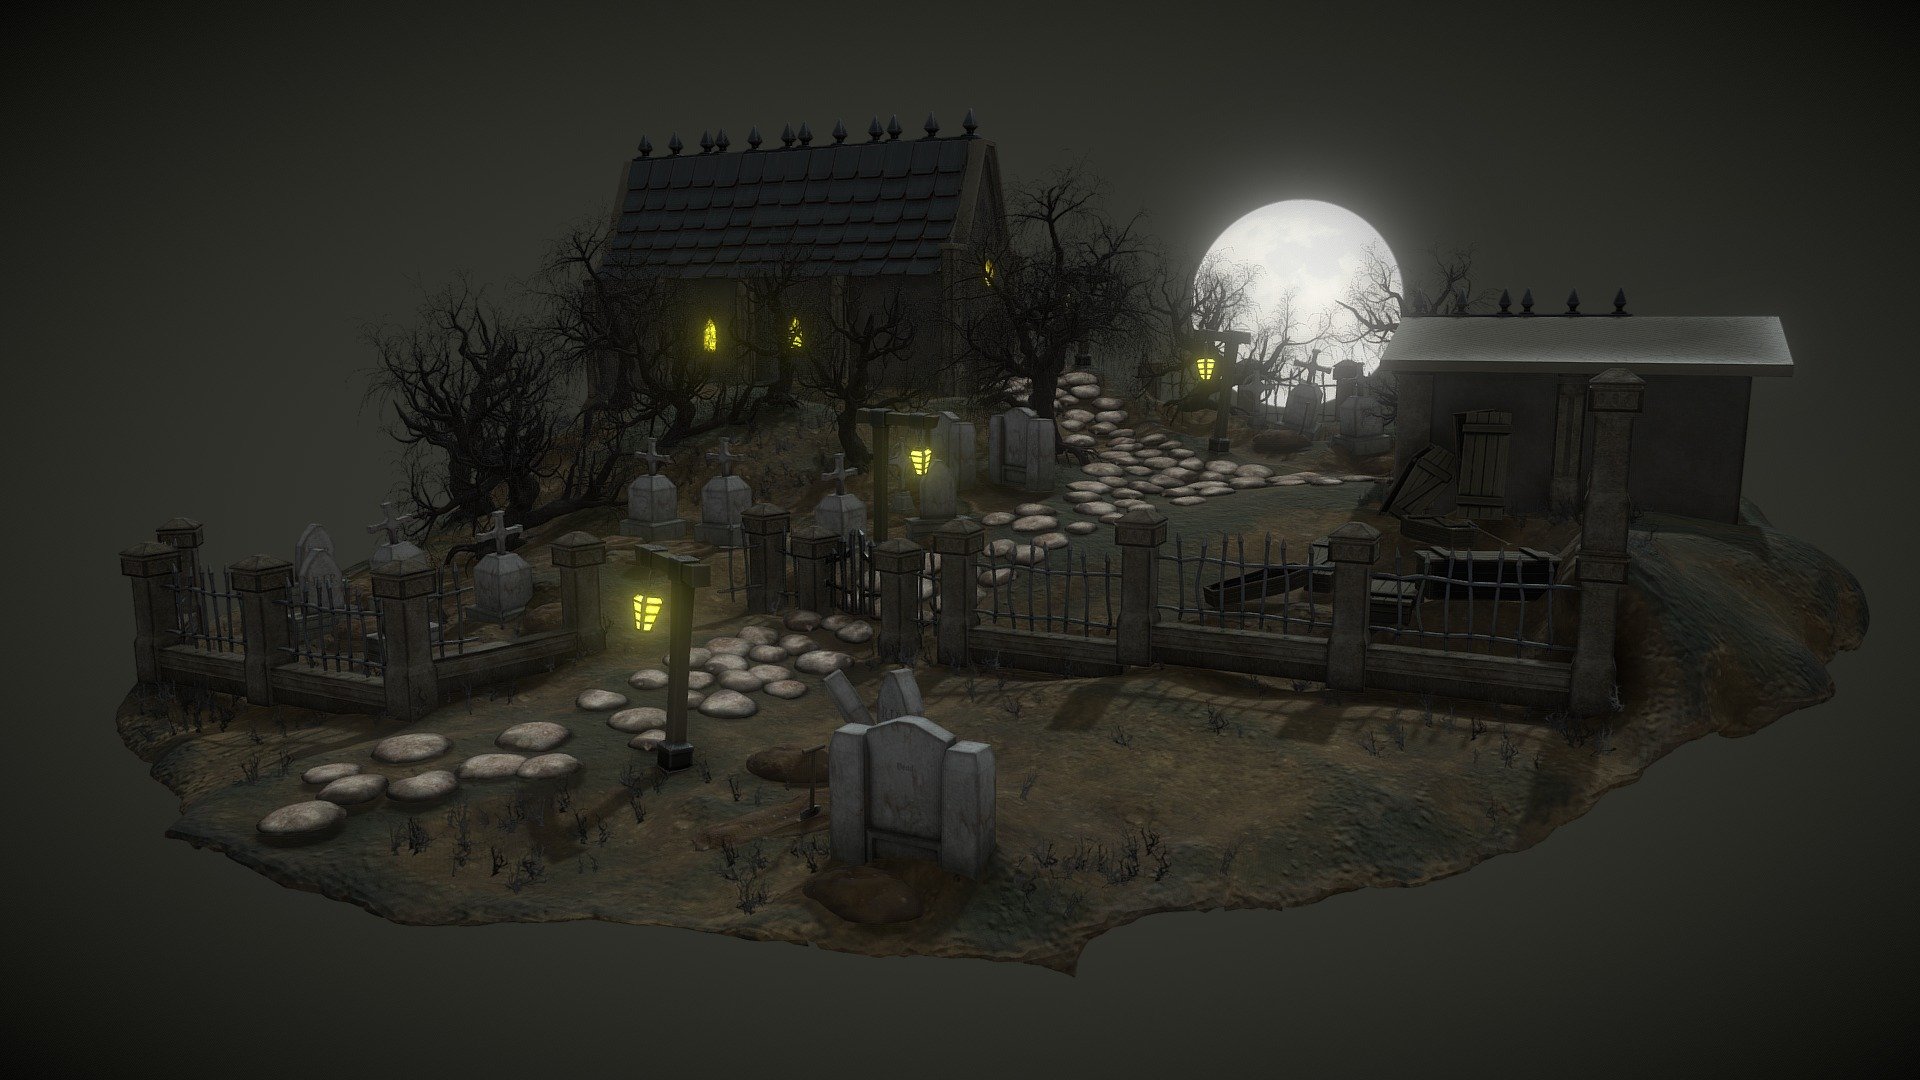 Stylized Graveyard Model &amp; Guide



Youtube complete Guide to this Model Link: https://youtu.be/G_q4rLqNoS0

This is the modular pack containing all the parts from the Youtube complete guide.  This pack contains 36 Blender texture maps and 24 Unreal Engine unique maps.  Below is a list of what the pack contains.

3 X Modular house blocks | 2 X Large Roofs | 6 X Pillars | 2 X Door | 2 X Windows | 1 X Roof Top | 2 X Lamp posts ( 1 X Animated) | 1 X Fence | 1 X Gate | 2 X Grave | 1 X Stepping Stones | 2 X Coffins | 4 X Grave Stones | 3 X Trees

1 X Blender Packed File complete with camera setup in Eevee Renderer - Stylized Graveyard Model & Guide - Buy Royalty Free 3D model by 3D Tudor (@3DTudor) 3d model